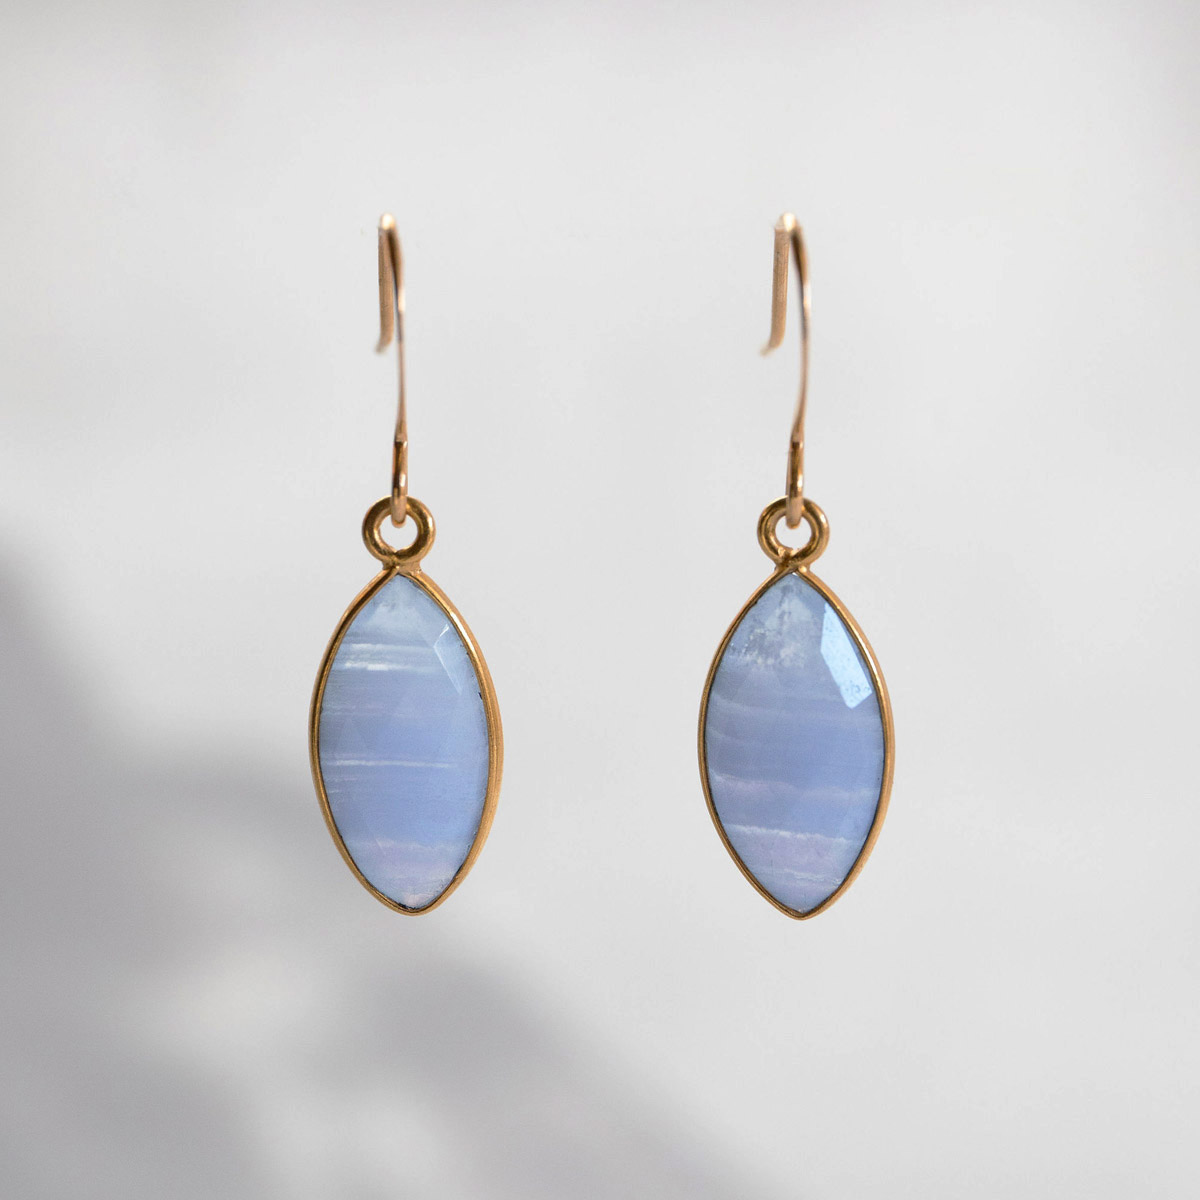 The Endless Sky Earrings, bezel-set marquise cut blue lace agates finished on gold tone french style hooks.